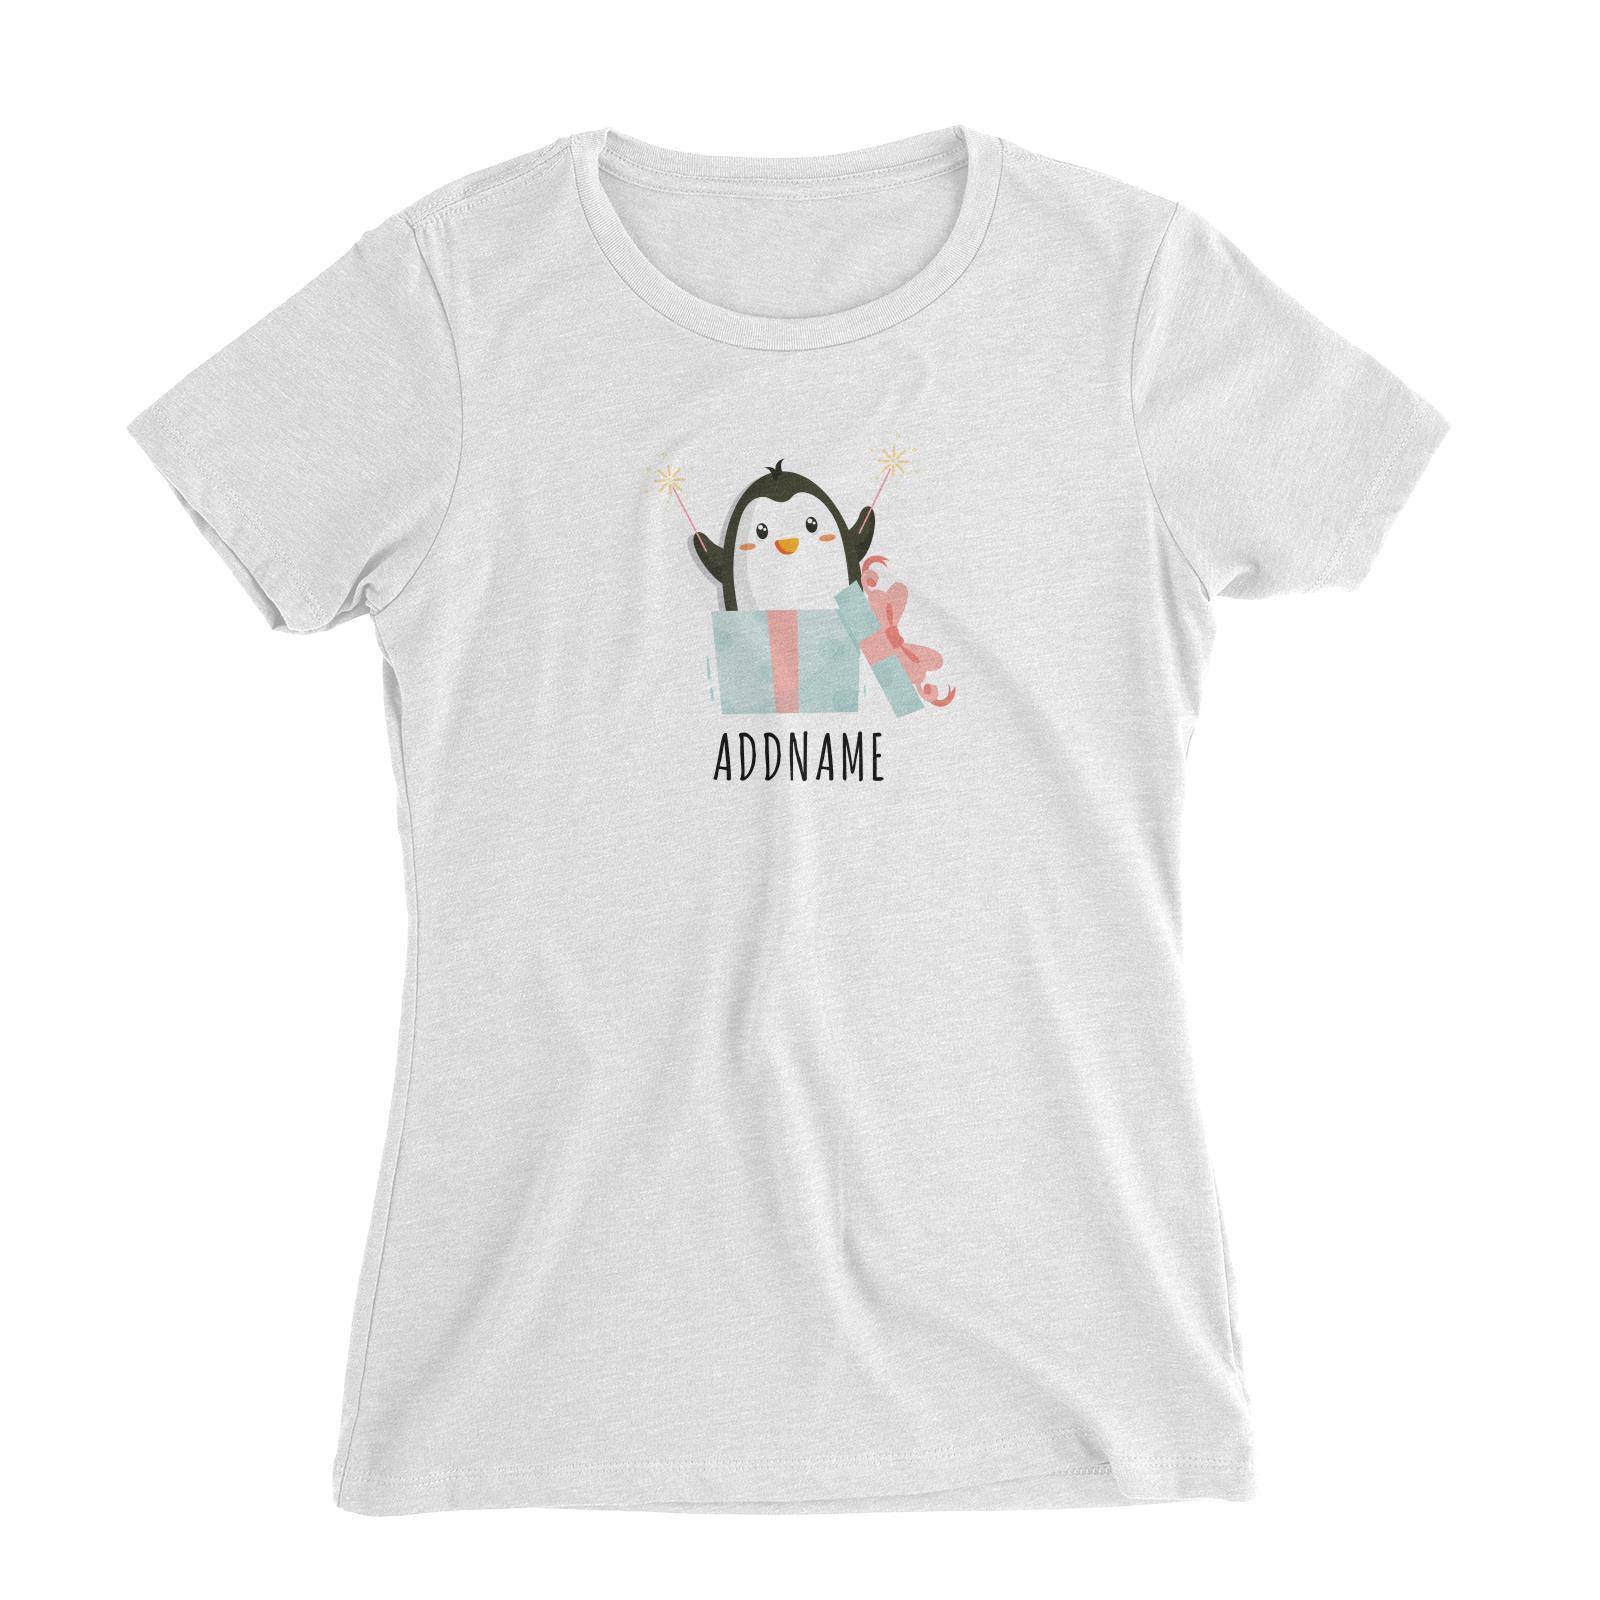 Birthday Cute Penguin Taking Fireworks In Present Box Addname Women's Slim Fit T-Shirt